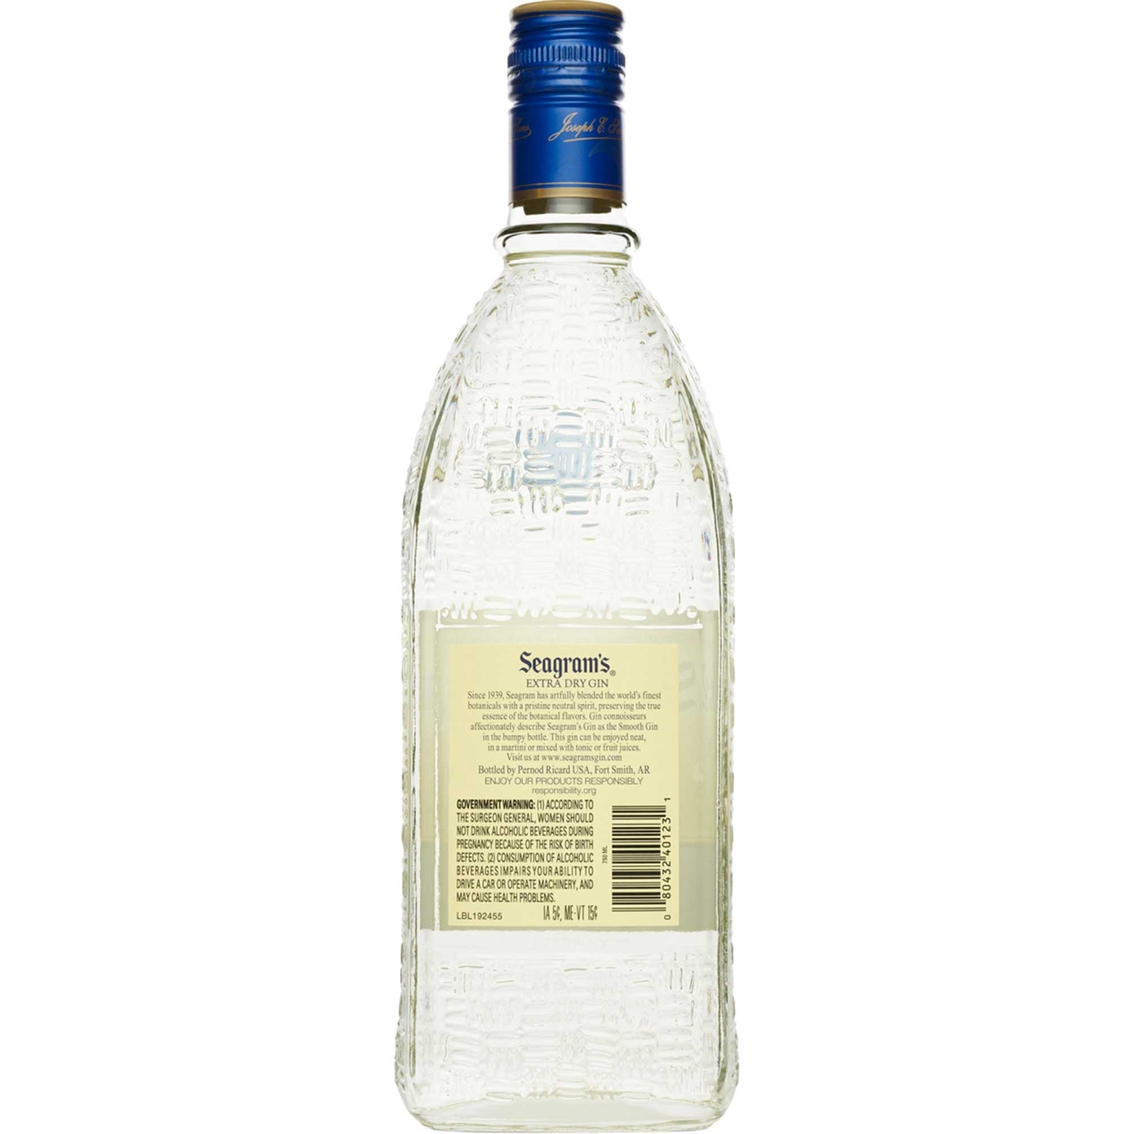 Seagram's Extra Dry Gin 750ml - Image 2 of 2